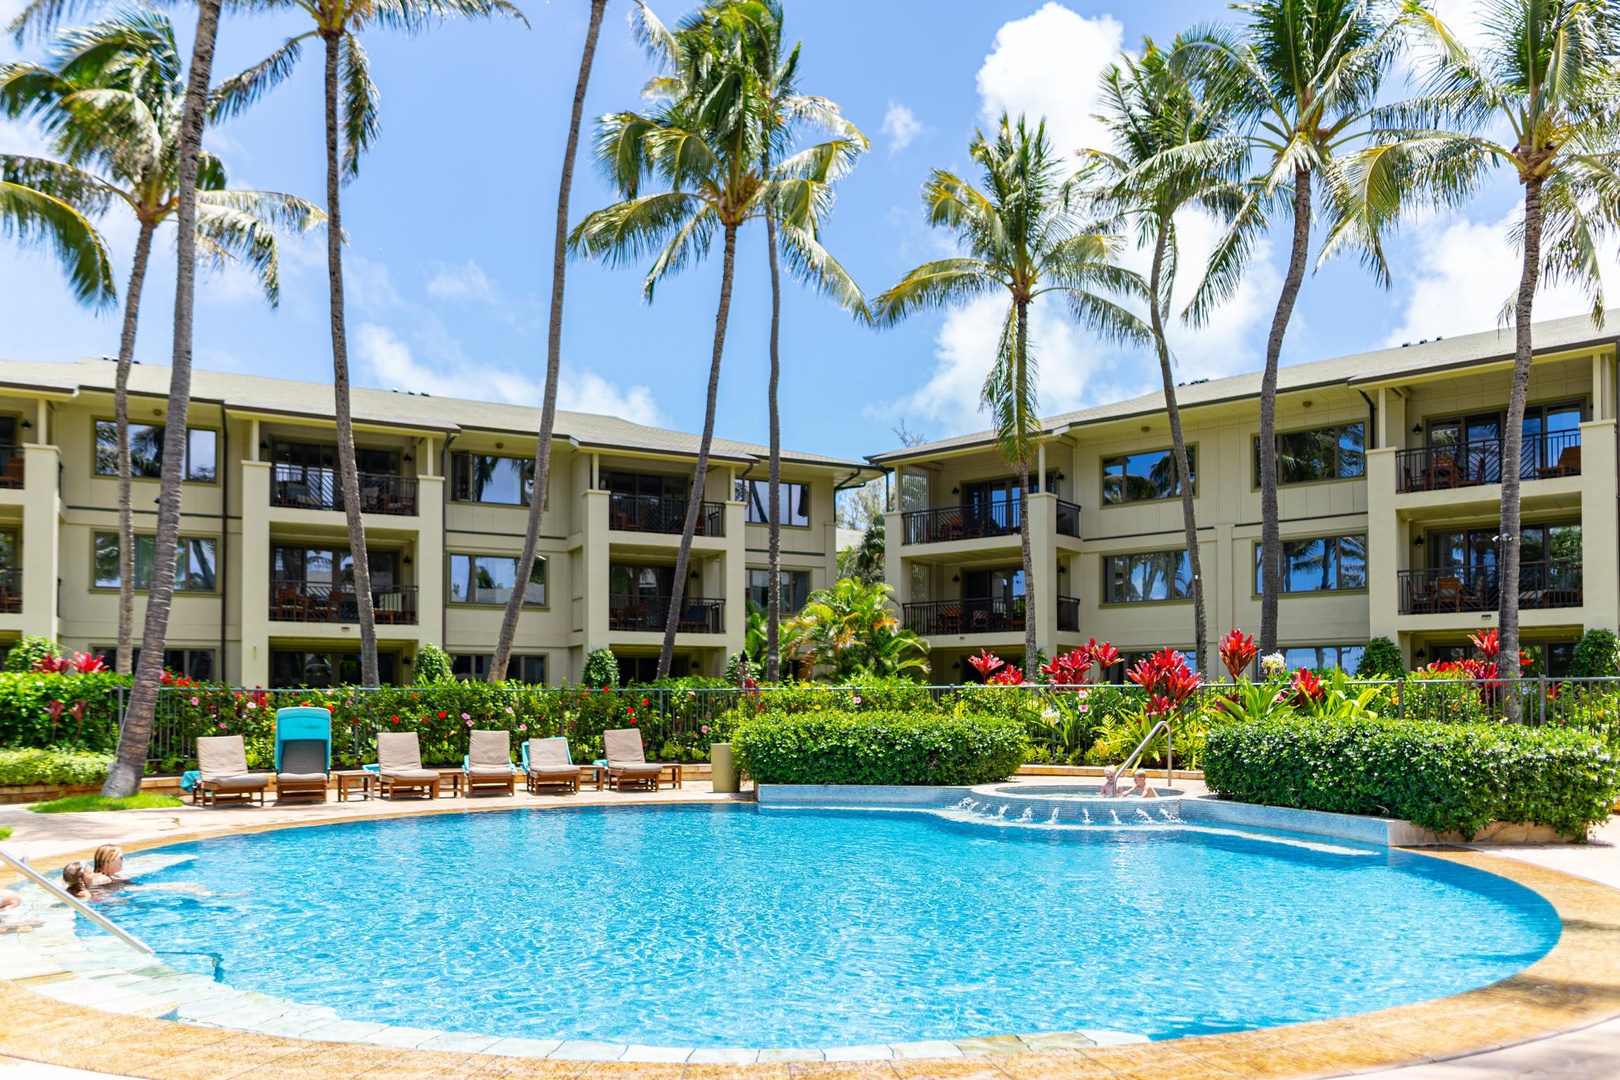 Kahuku Vacation Rentals, Turtle Bay Villas 114 - Lounge poolside and soak in the sun or jump in for some fun